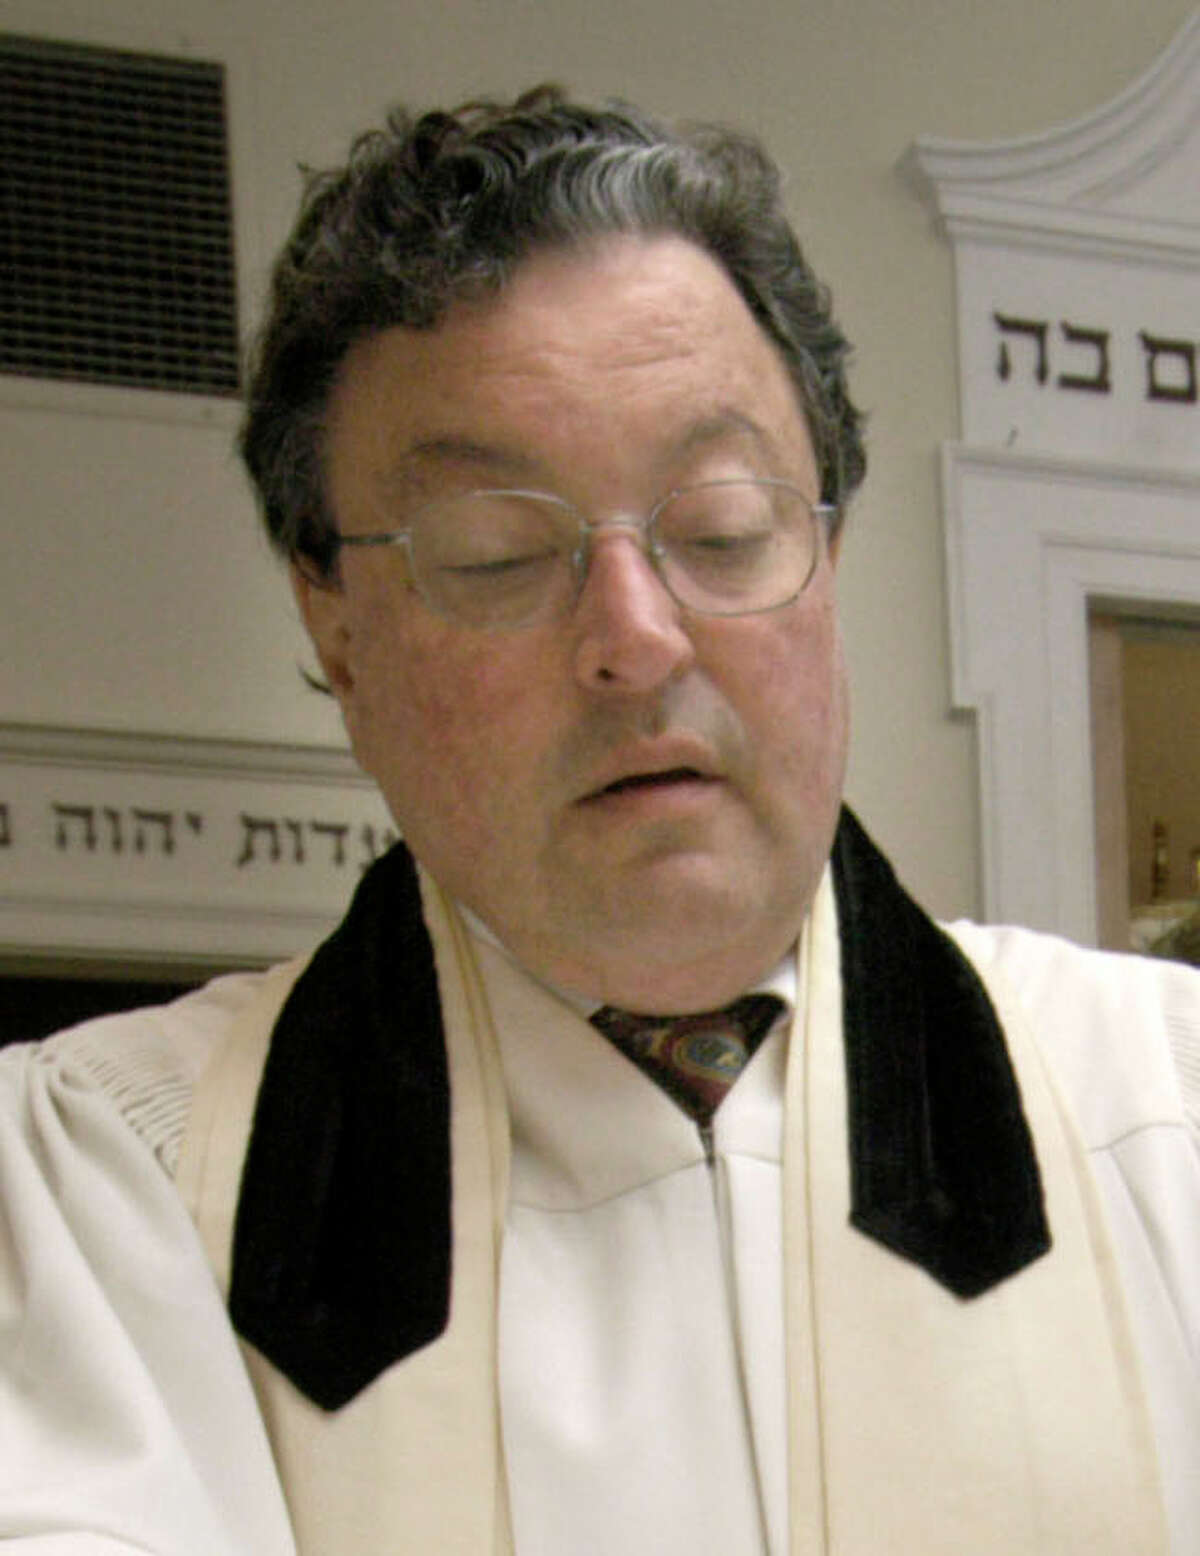 Rabbi Clifford Librach of the United Jewish Center in Danbury reads from the Torah in this News-Times file photo.